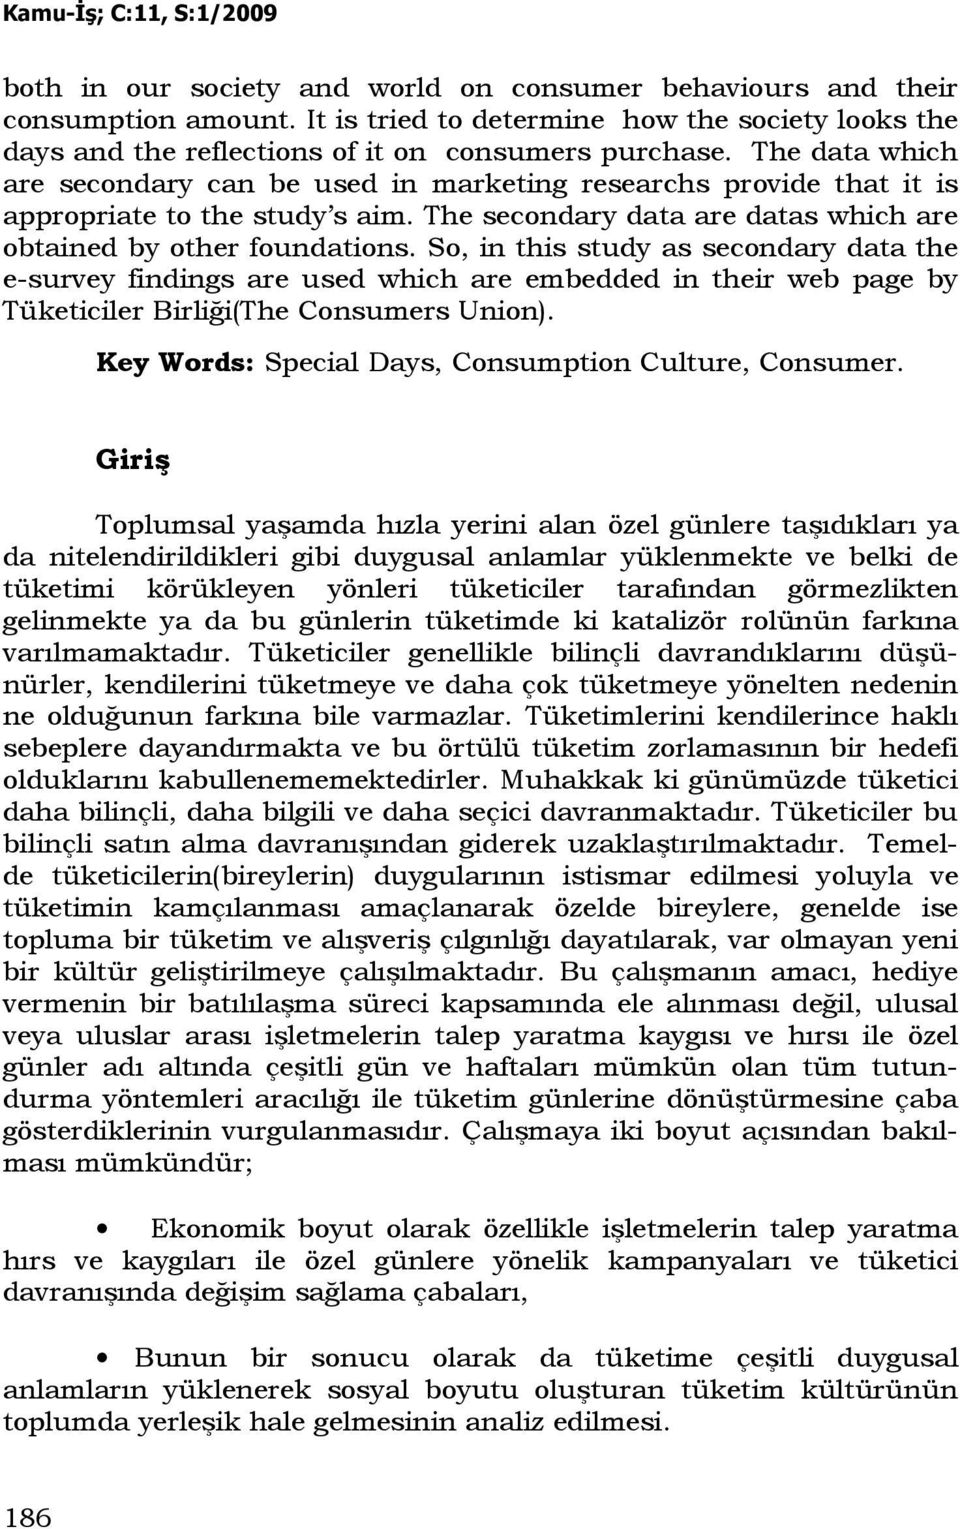 So, in this study as secondary data the e-survey findings are used which are embedded in their web page by Tüketiciler Birliği(The Consumers Union).